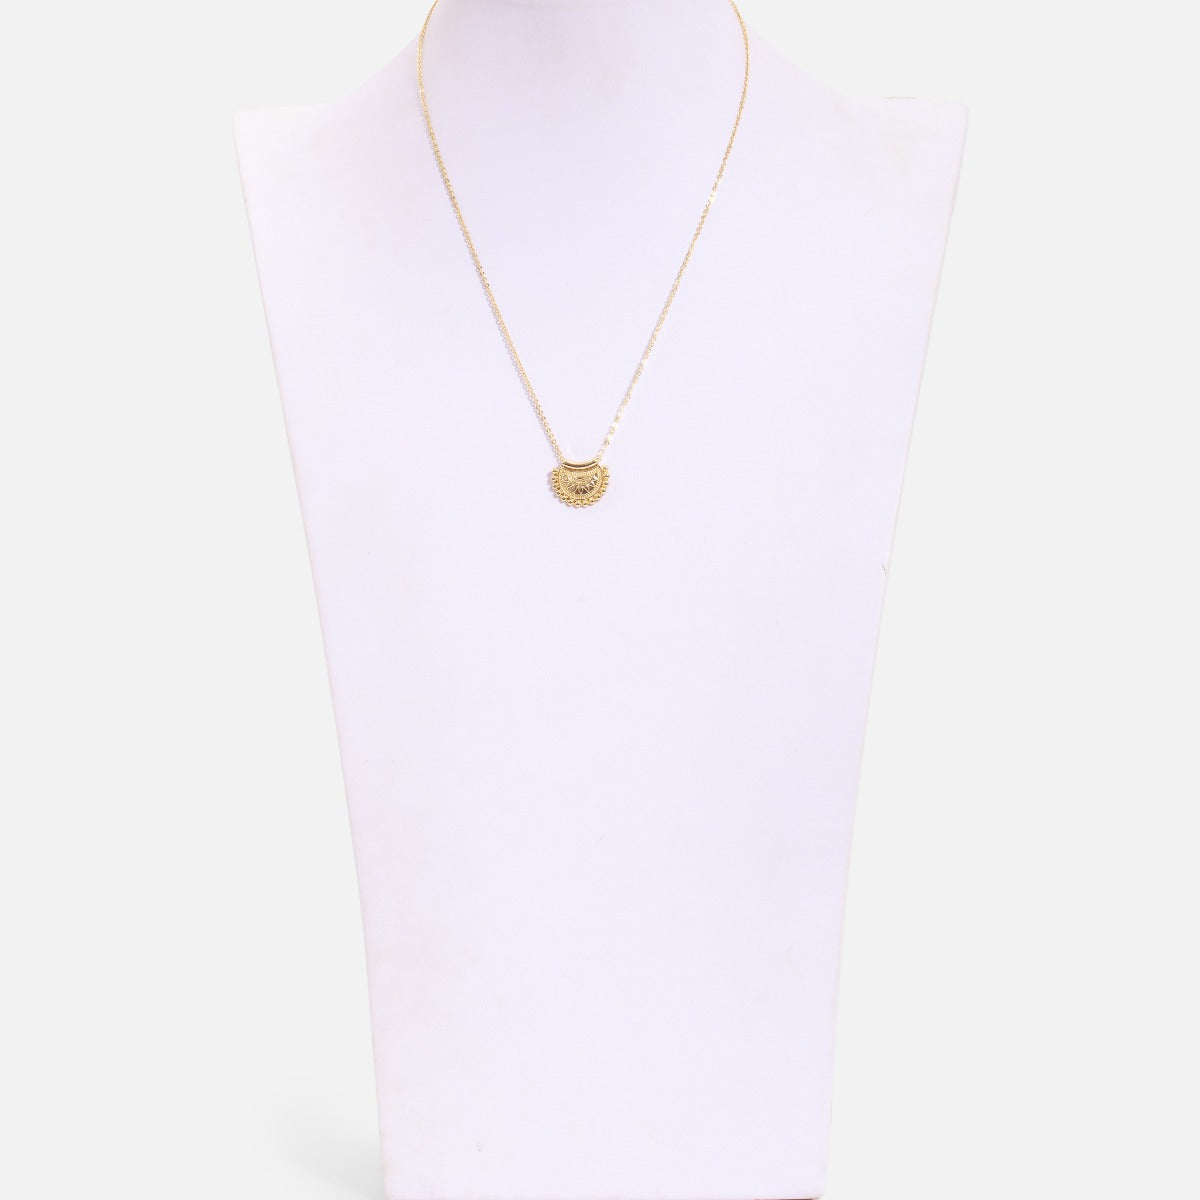 Golden necklace with mandala charm